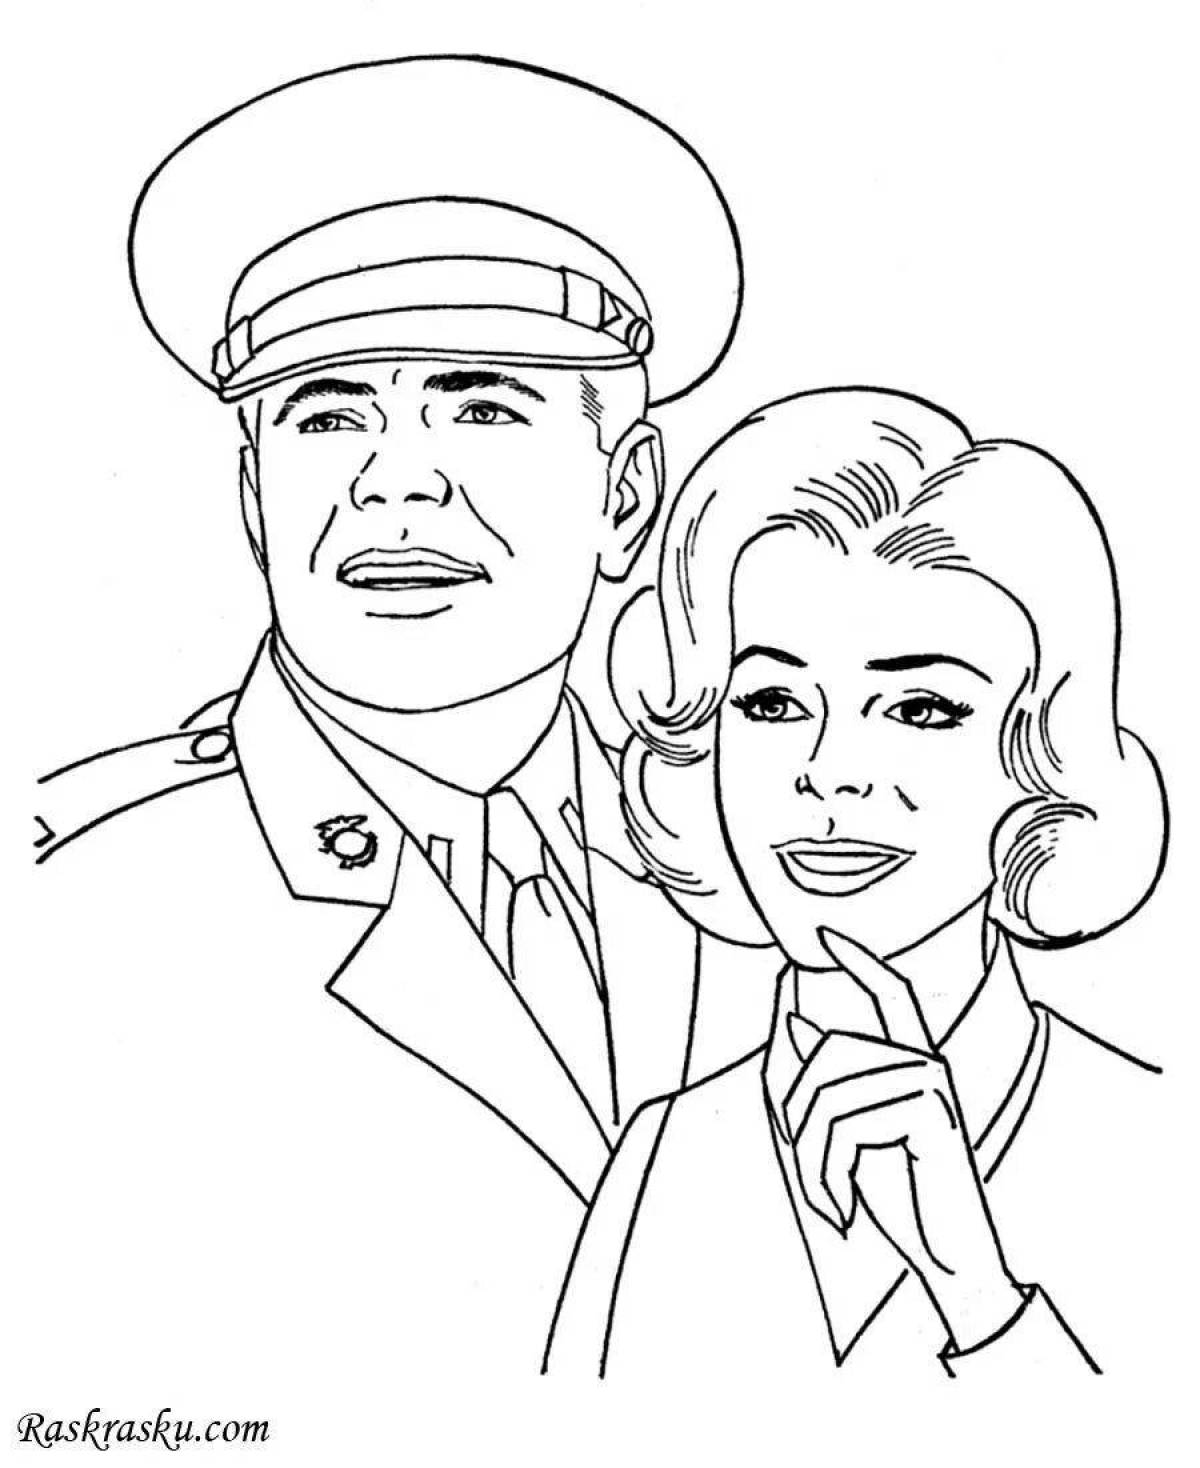 Dazzling military portrait coloring page